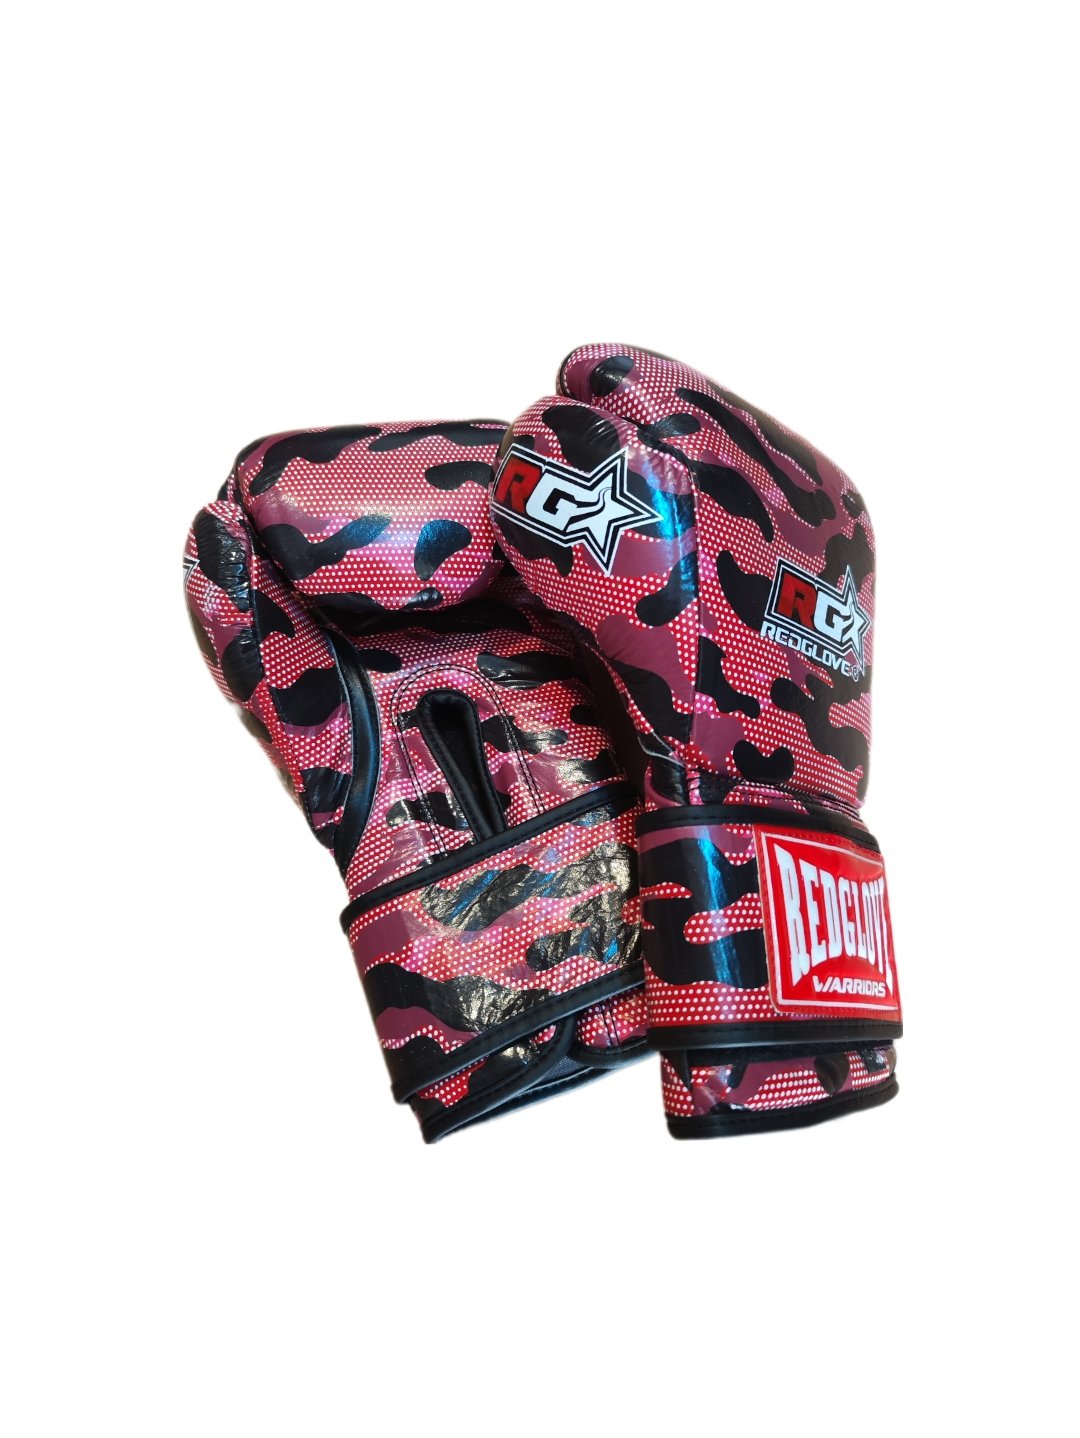 Guantes de Boxeo Rg Pro fighter 3.0 Red - Redglove